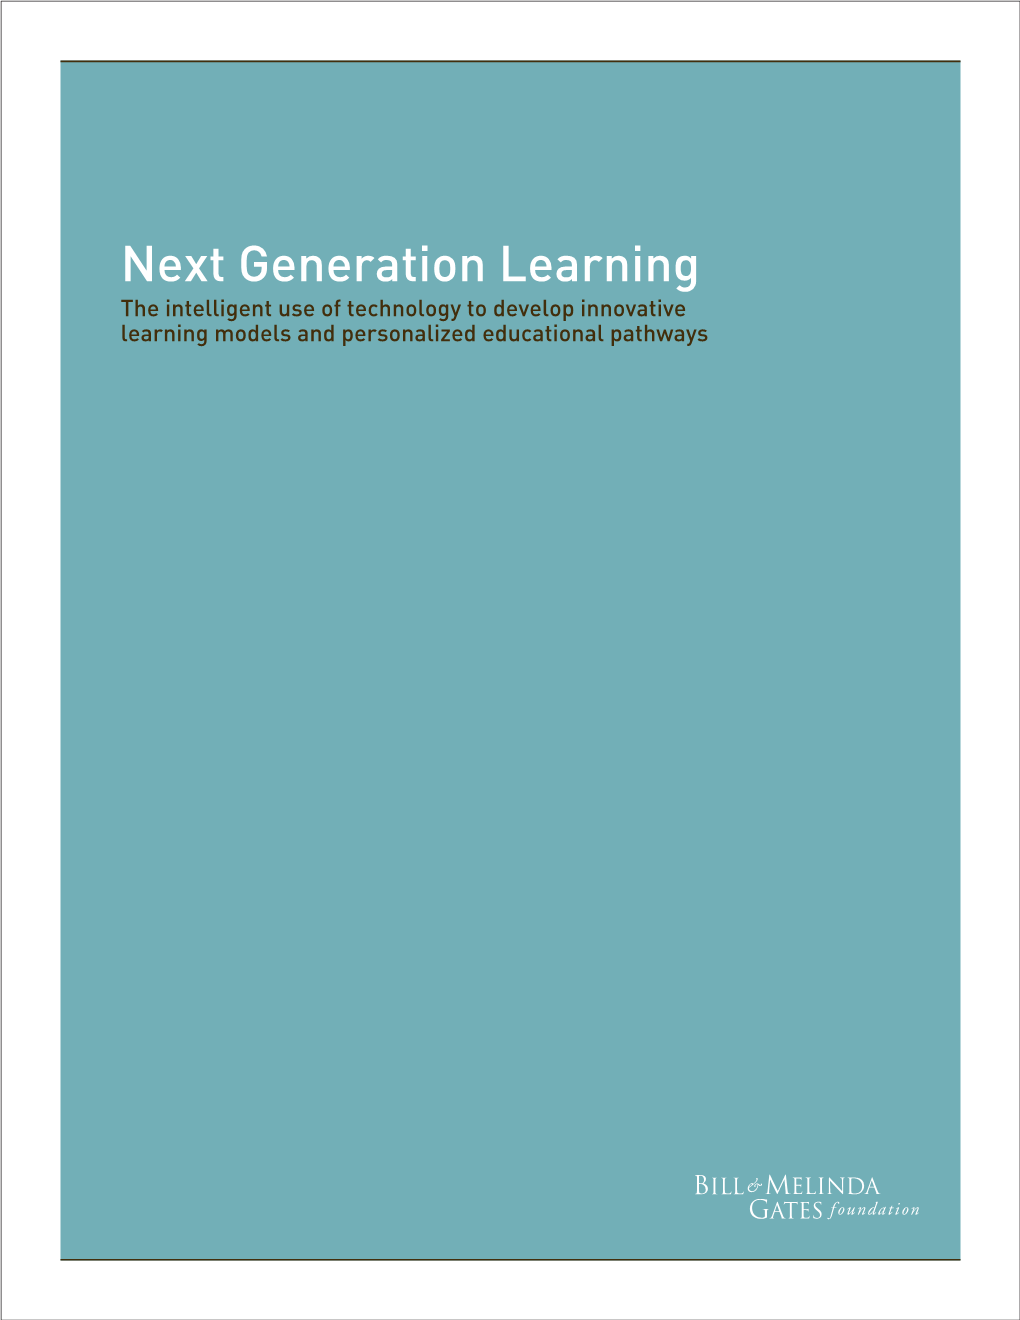 Next Generation Learning the Intelligent Use of Technology to Develop Innovative Learning Models and Personalized Educational Pathways Table of Contents